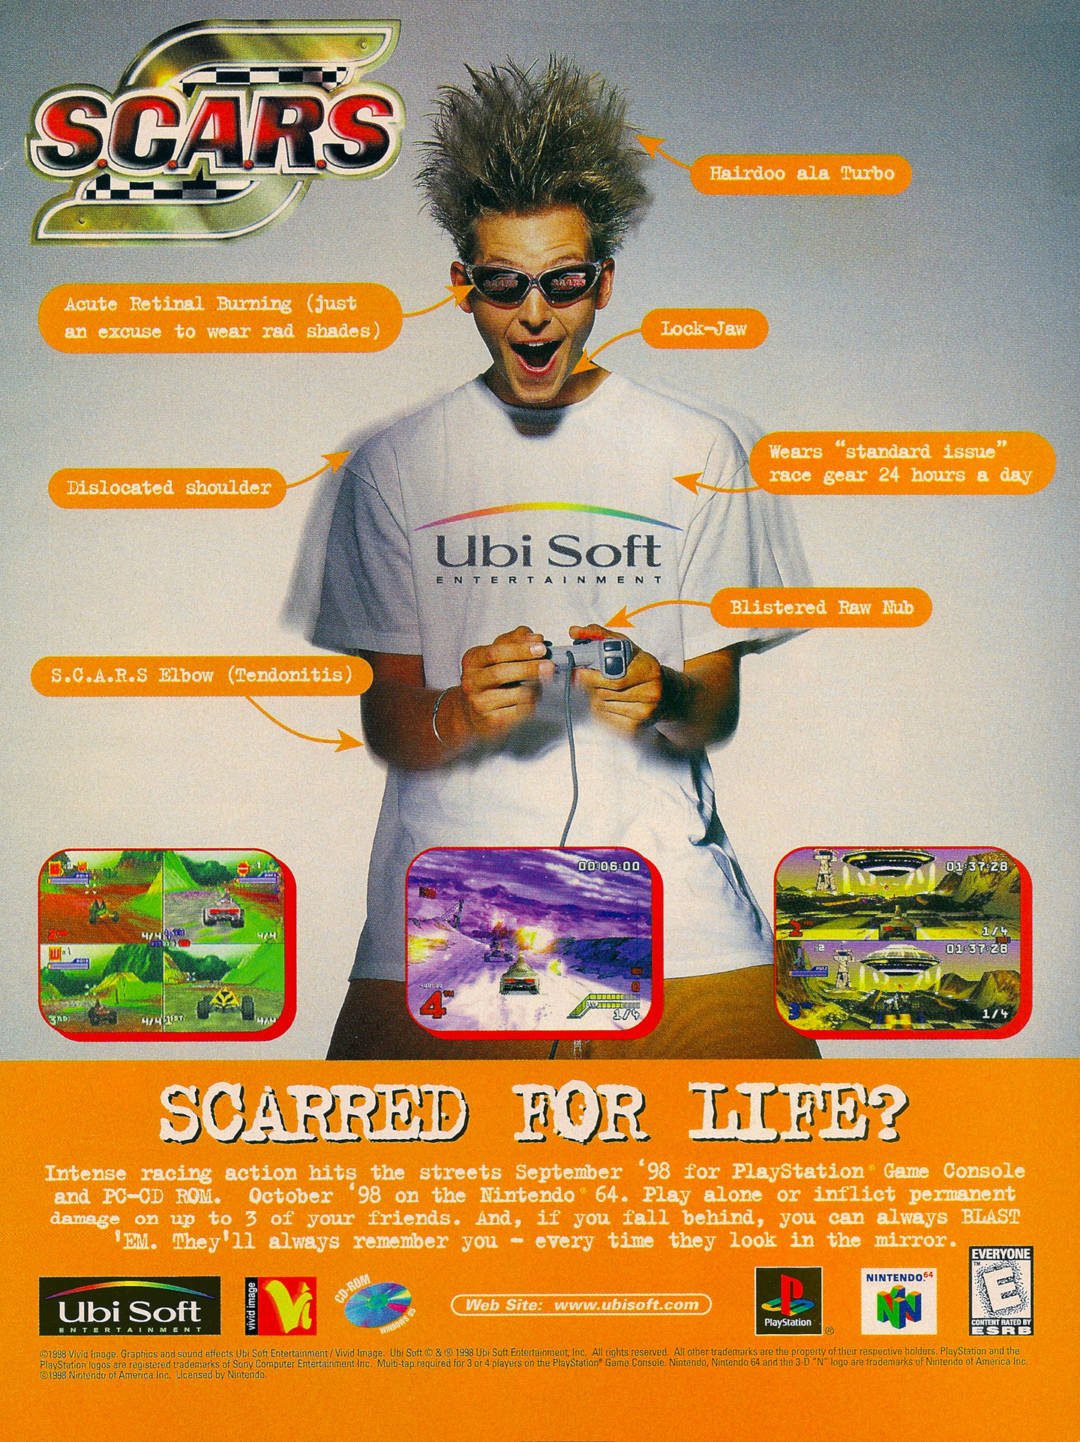 90s video game ads -  poster - Scars Acute Retinal Burning just an excuse to wear rad shades Dislocated shoulder S.C.A.R.S Elbow Tendonitis 445887 Ubi Soft Entertainment Kar CdRom Ubi Soft R 00 Lock Jaw Hairdoo ala Turbo Web Site " Wears standard issue ra